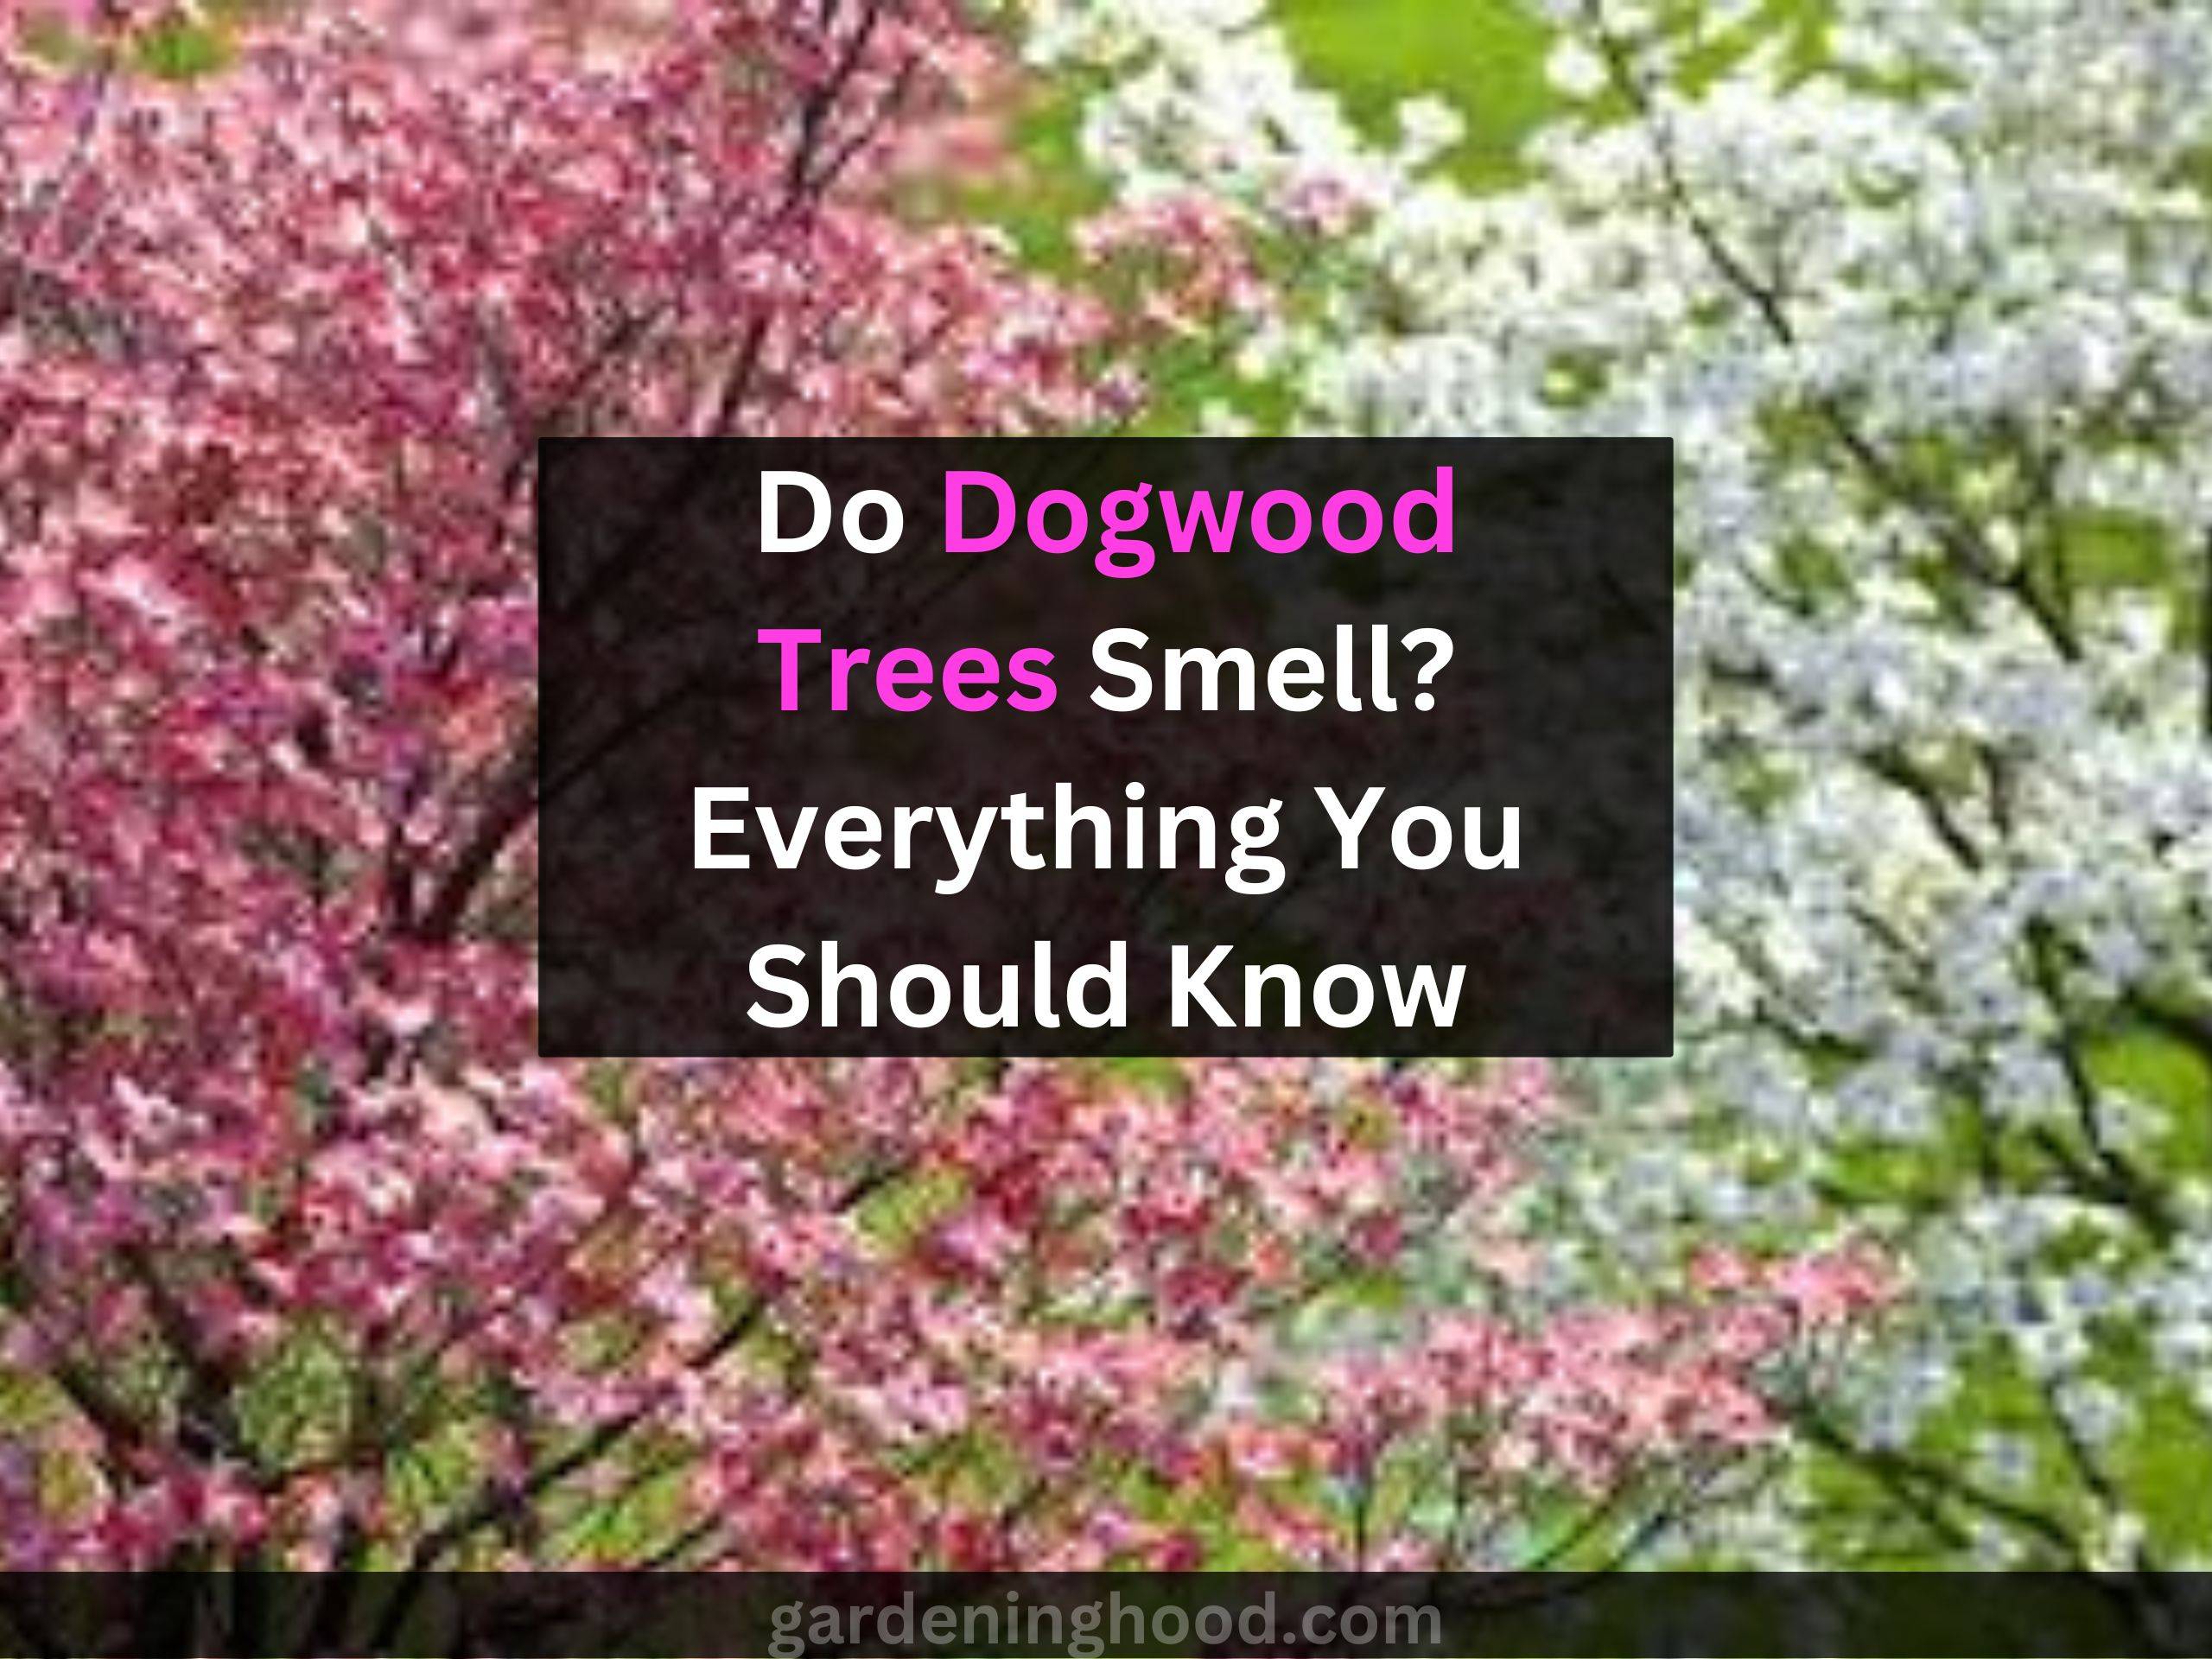 Do Dogwood Trees Smell? Everything You Should Know